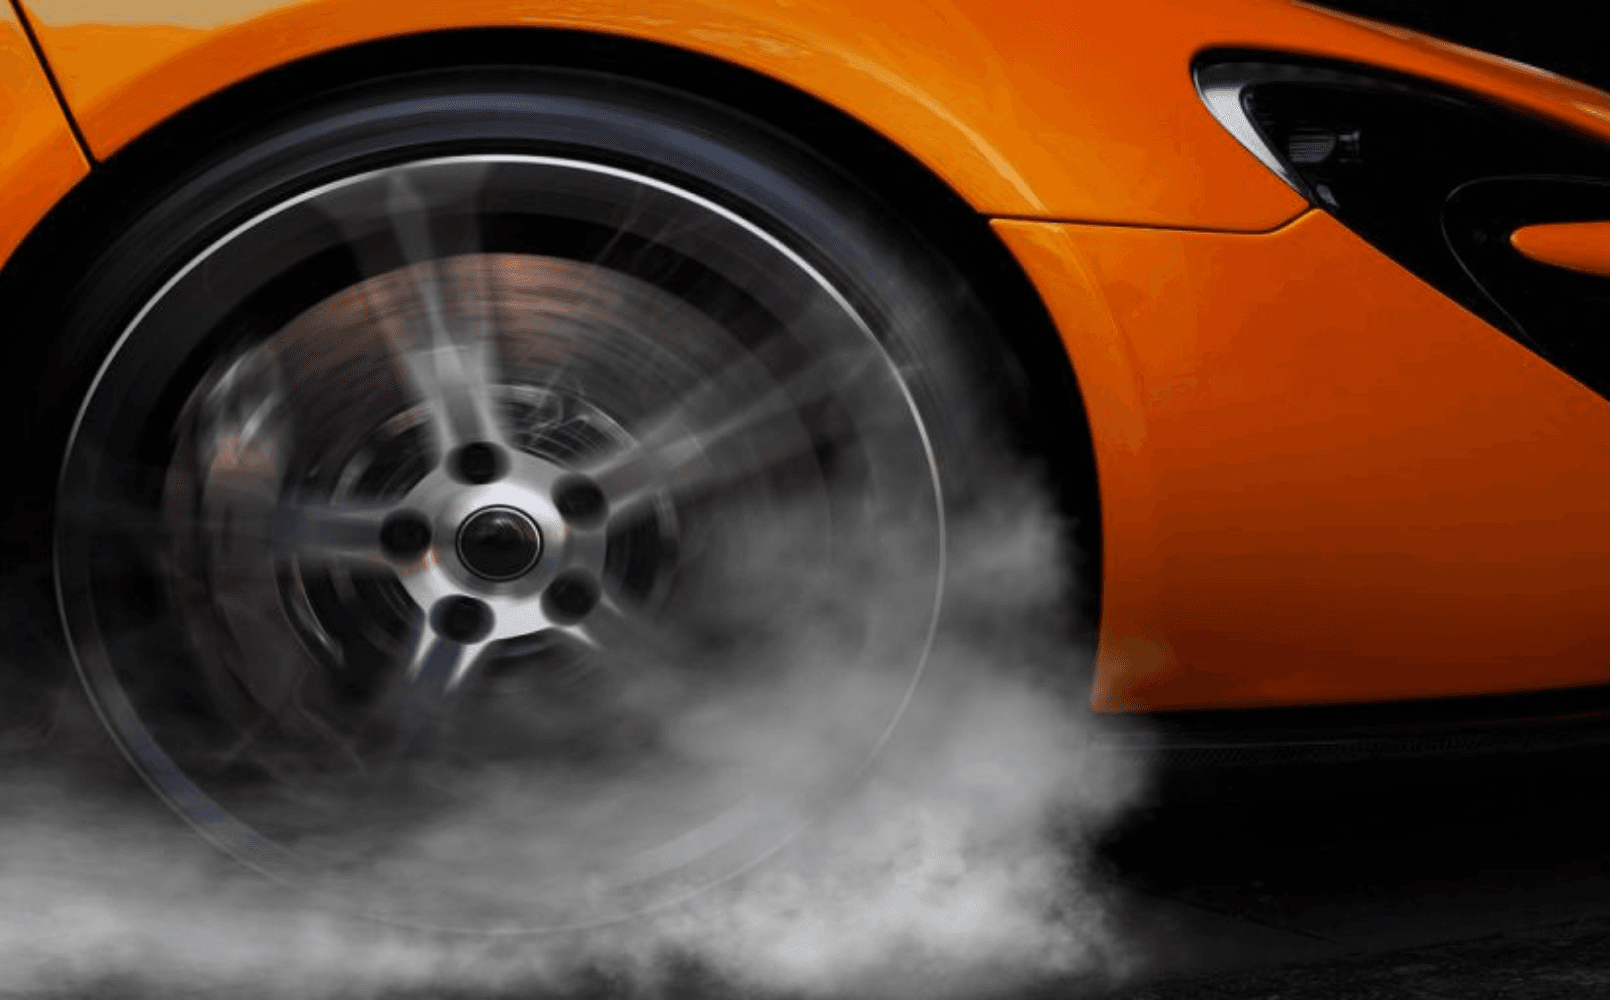 Weekly Brief: The EV Industry Is Putting Pedal To Metal, But Are We Headed For Burnout?